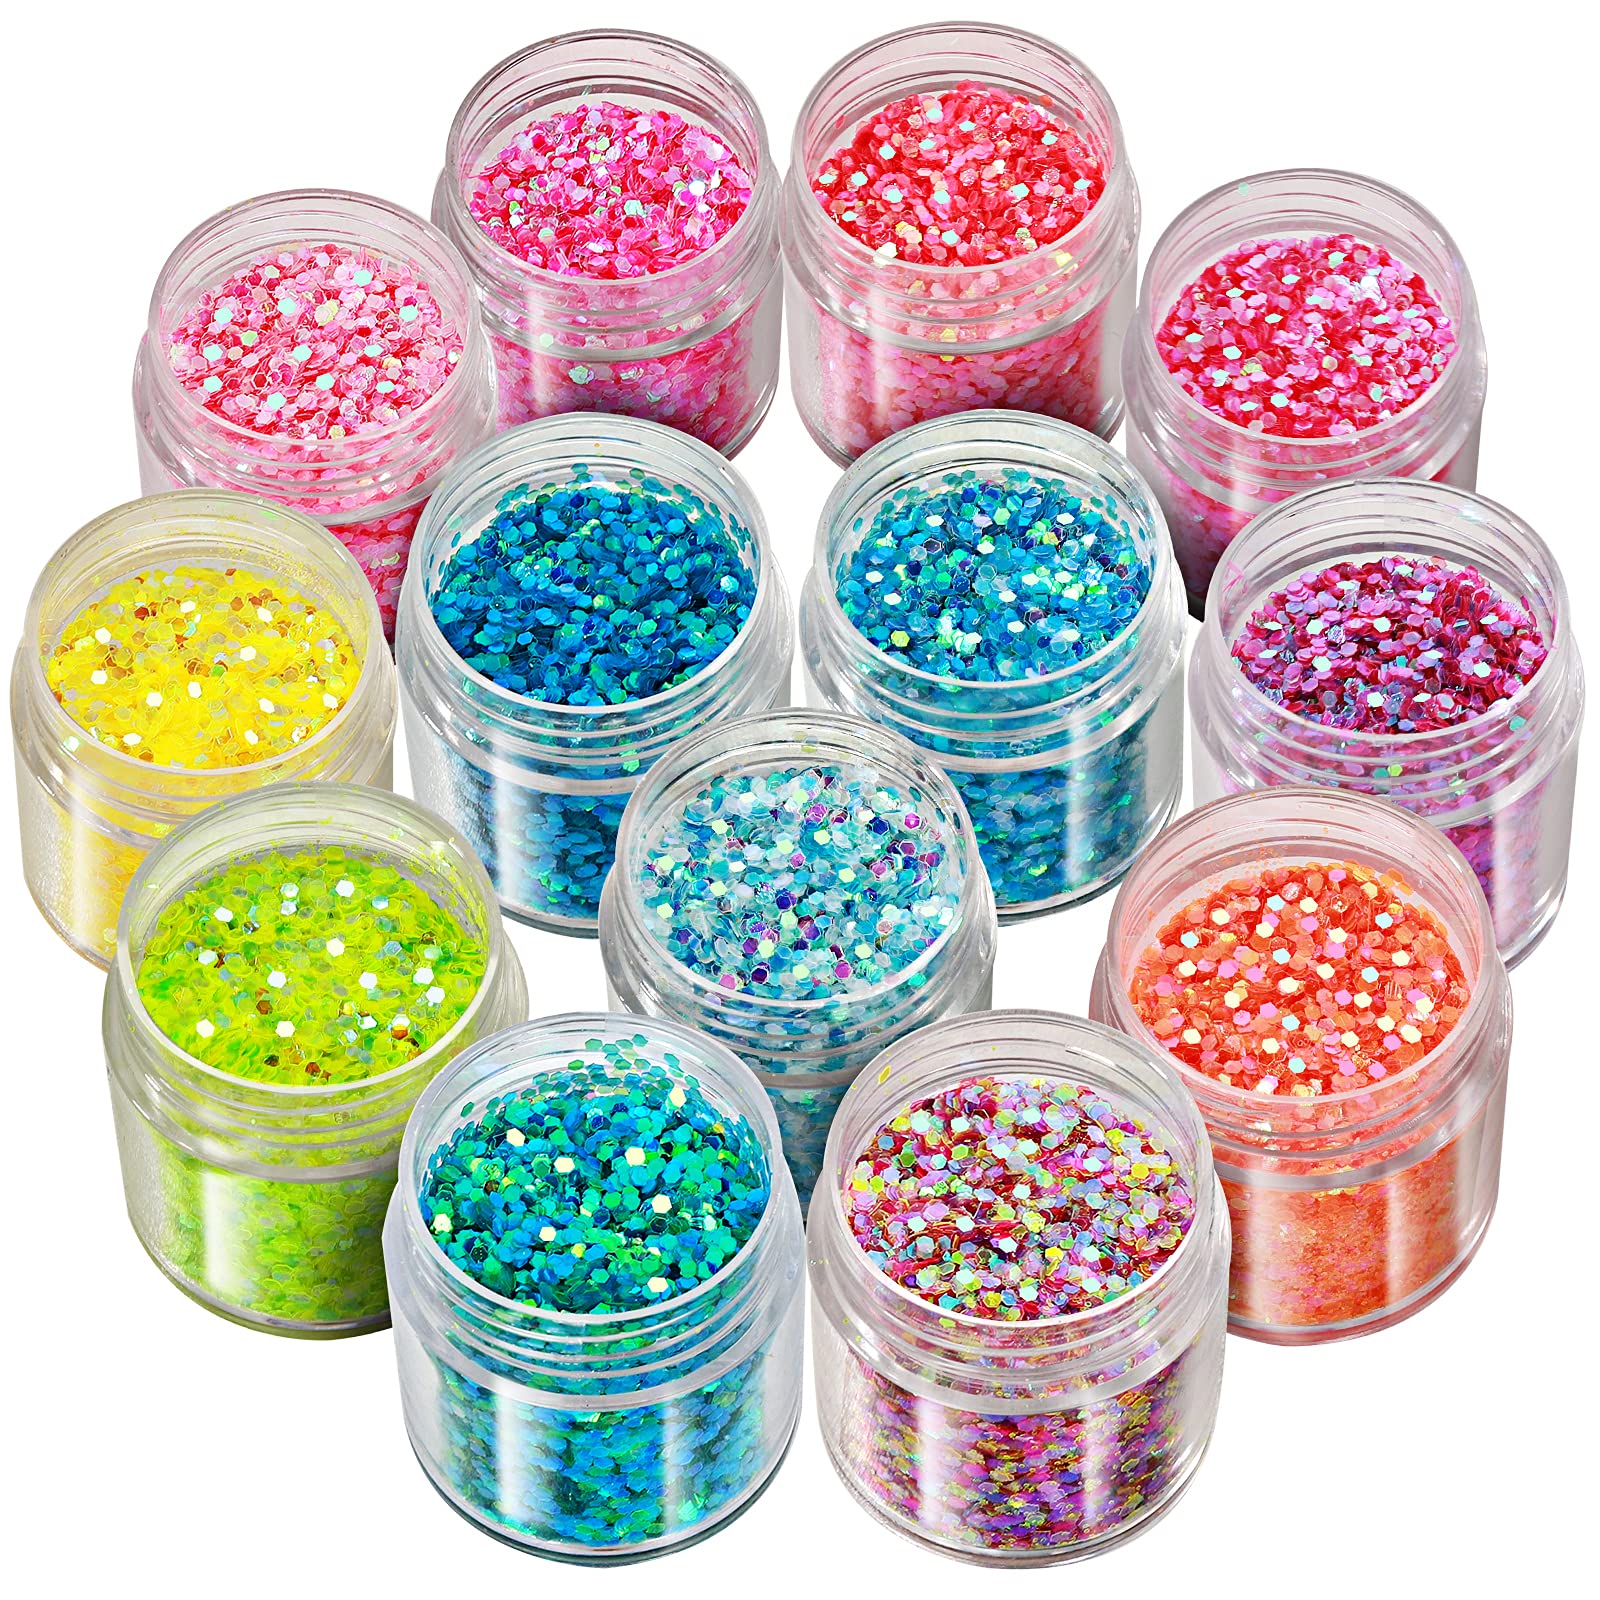 Glitter, 13 Colors Holographic Iridescent Rainbow Sequins Nail Glitter Face Hair Eye Makeup Cosmetic Festival Glitter